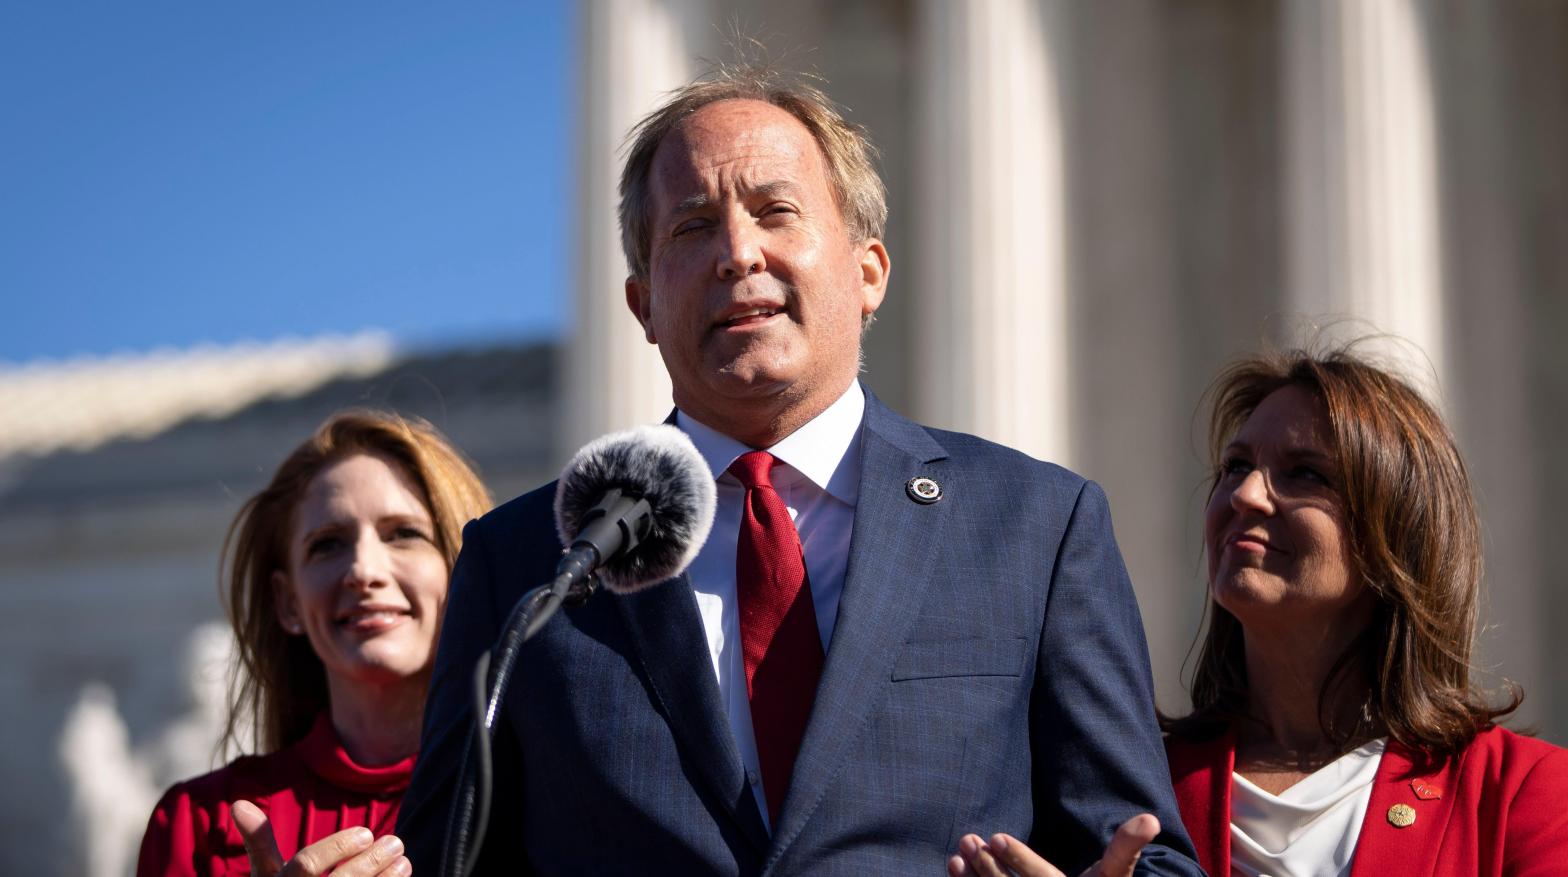 Texas Attorney General Ken Paxton outside the U.S. Supreme Court in November 2021. (Photo: Drew Angerer, Getty Images)